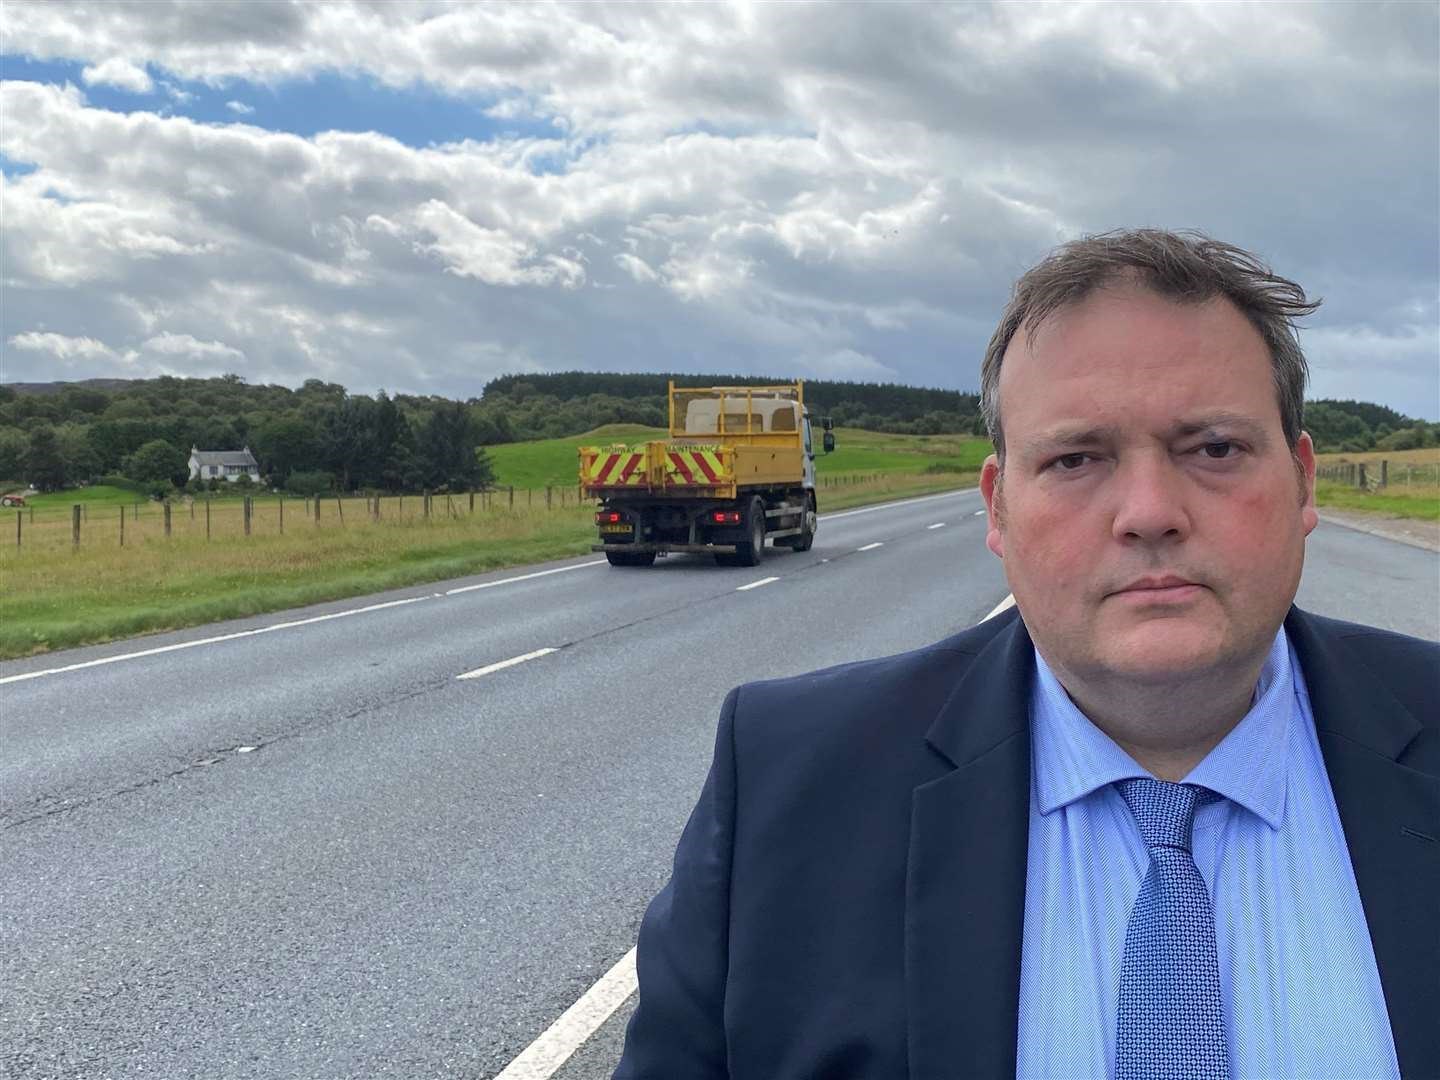 Highlands and Islands MSP Jamie Halcro Johnston wants an update on A9 dualling progress and timelines from Scottish Government.